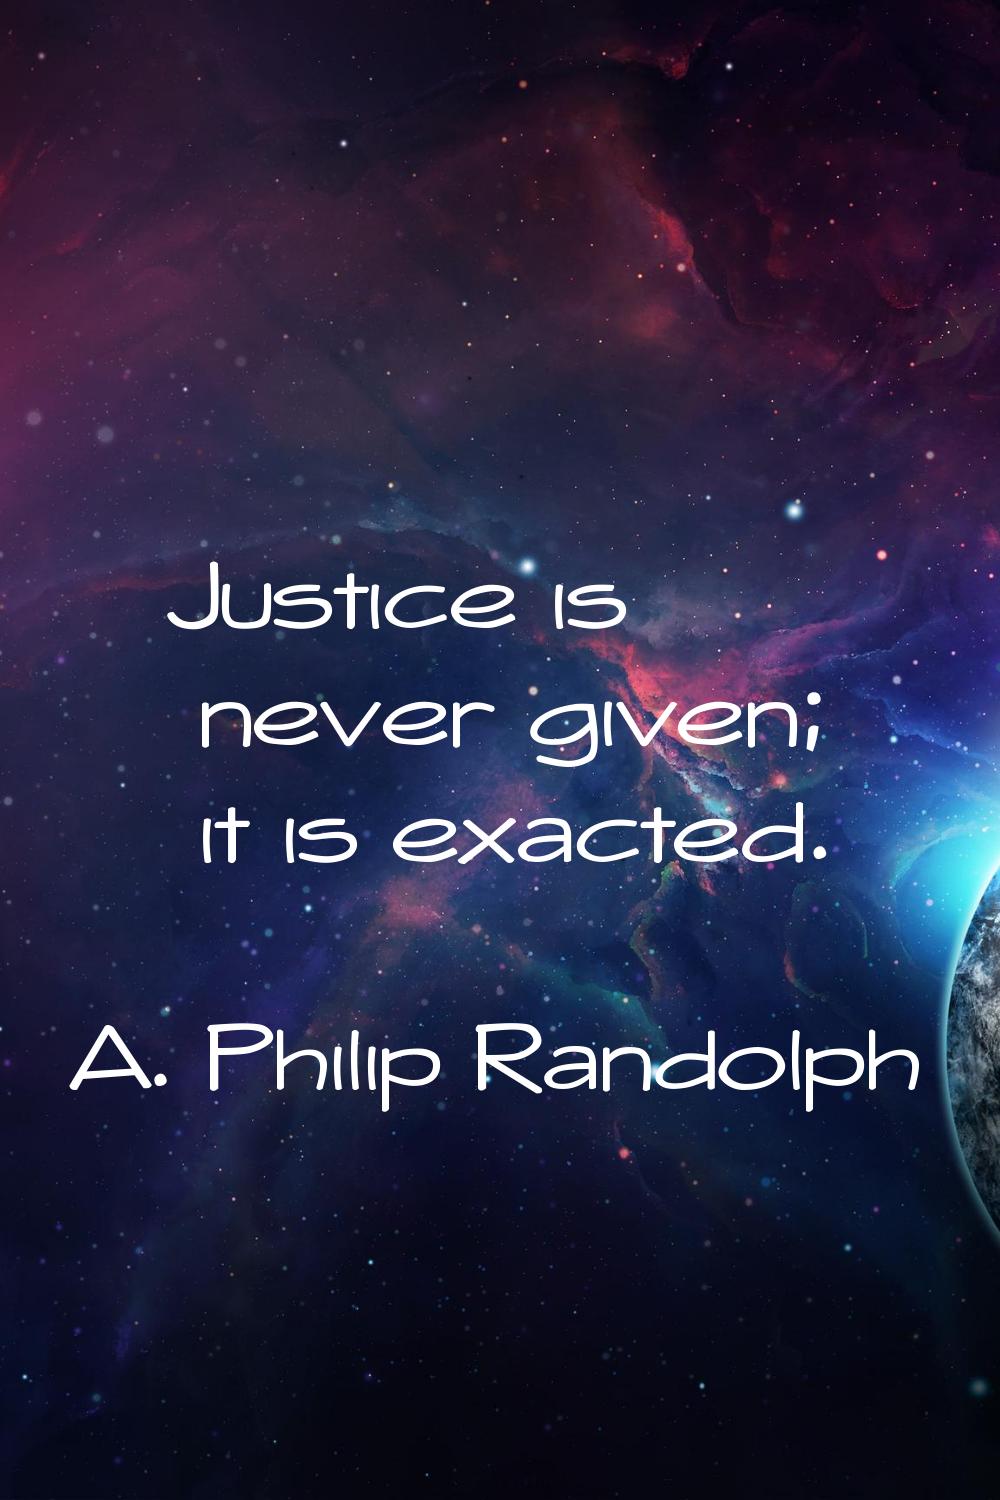 Justice is never given; it is exacted.